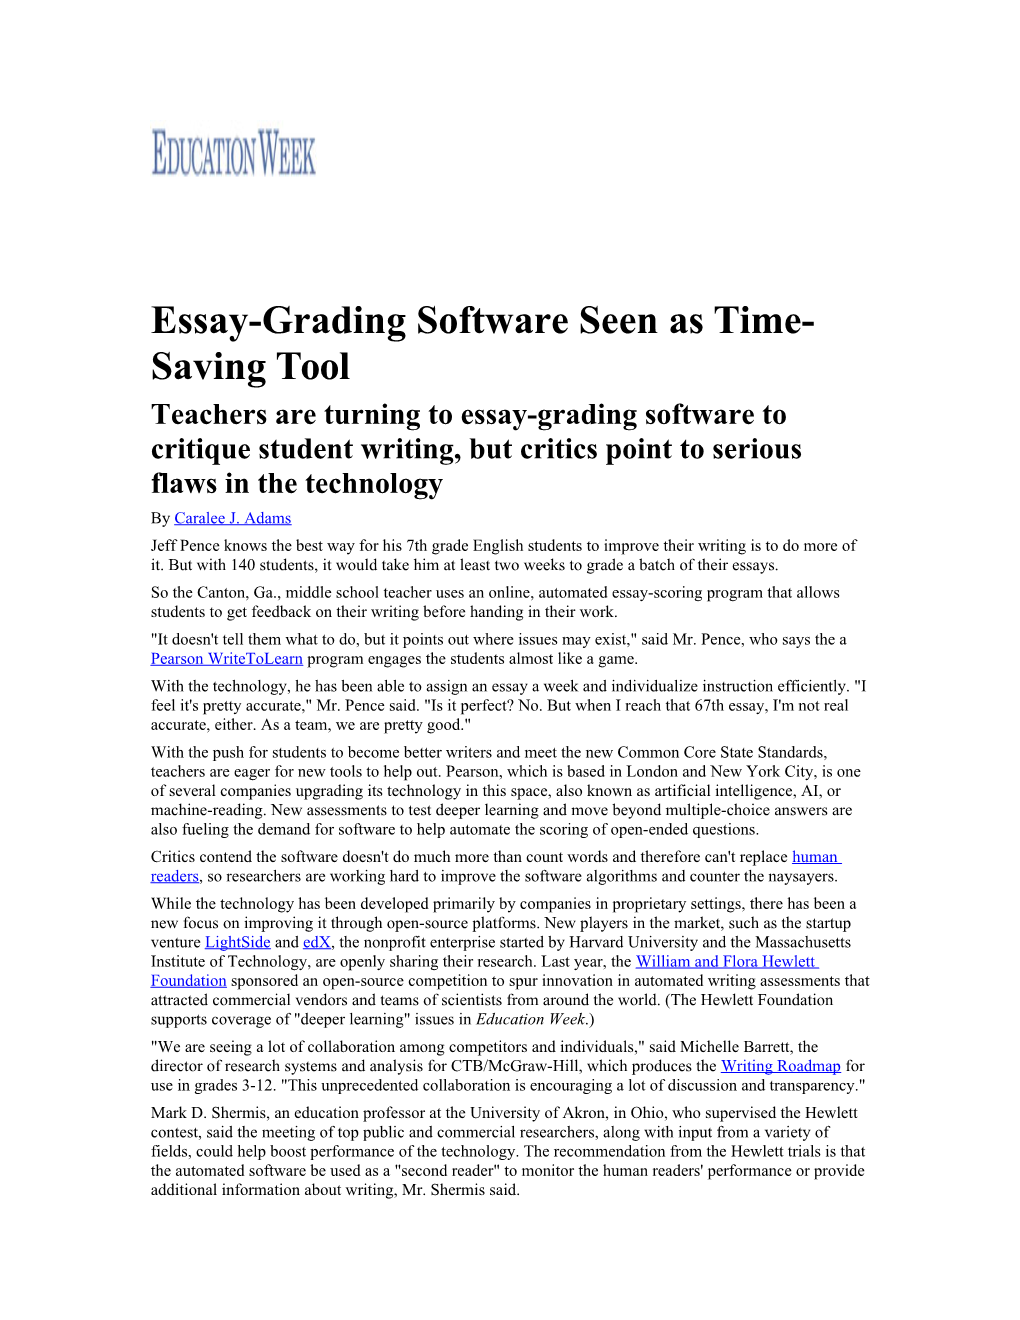 Essay-Grading Software Seen As Time-Saving Tool